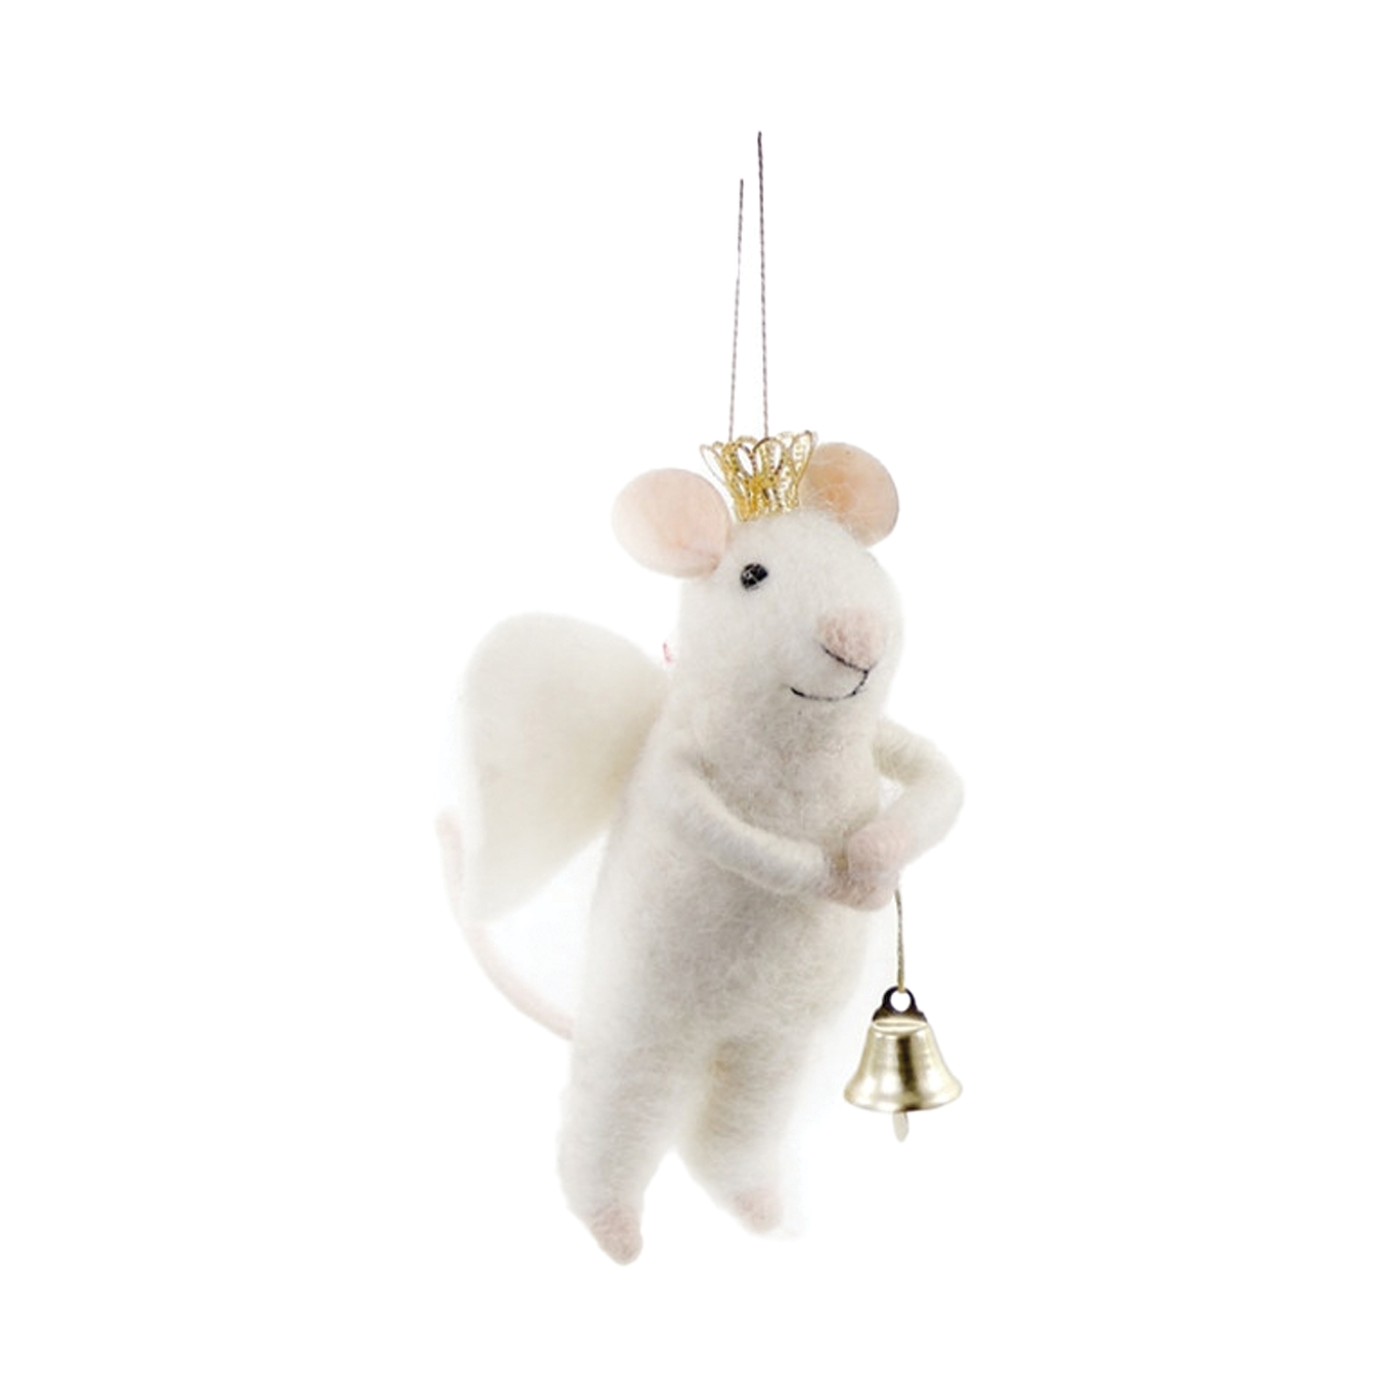 Merry X-mas Mr. Mouse Ornament - Angel